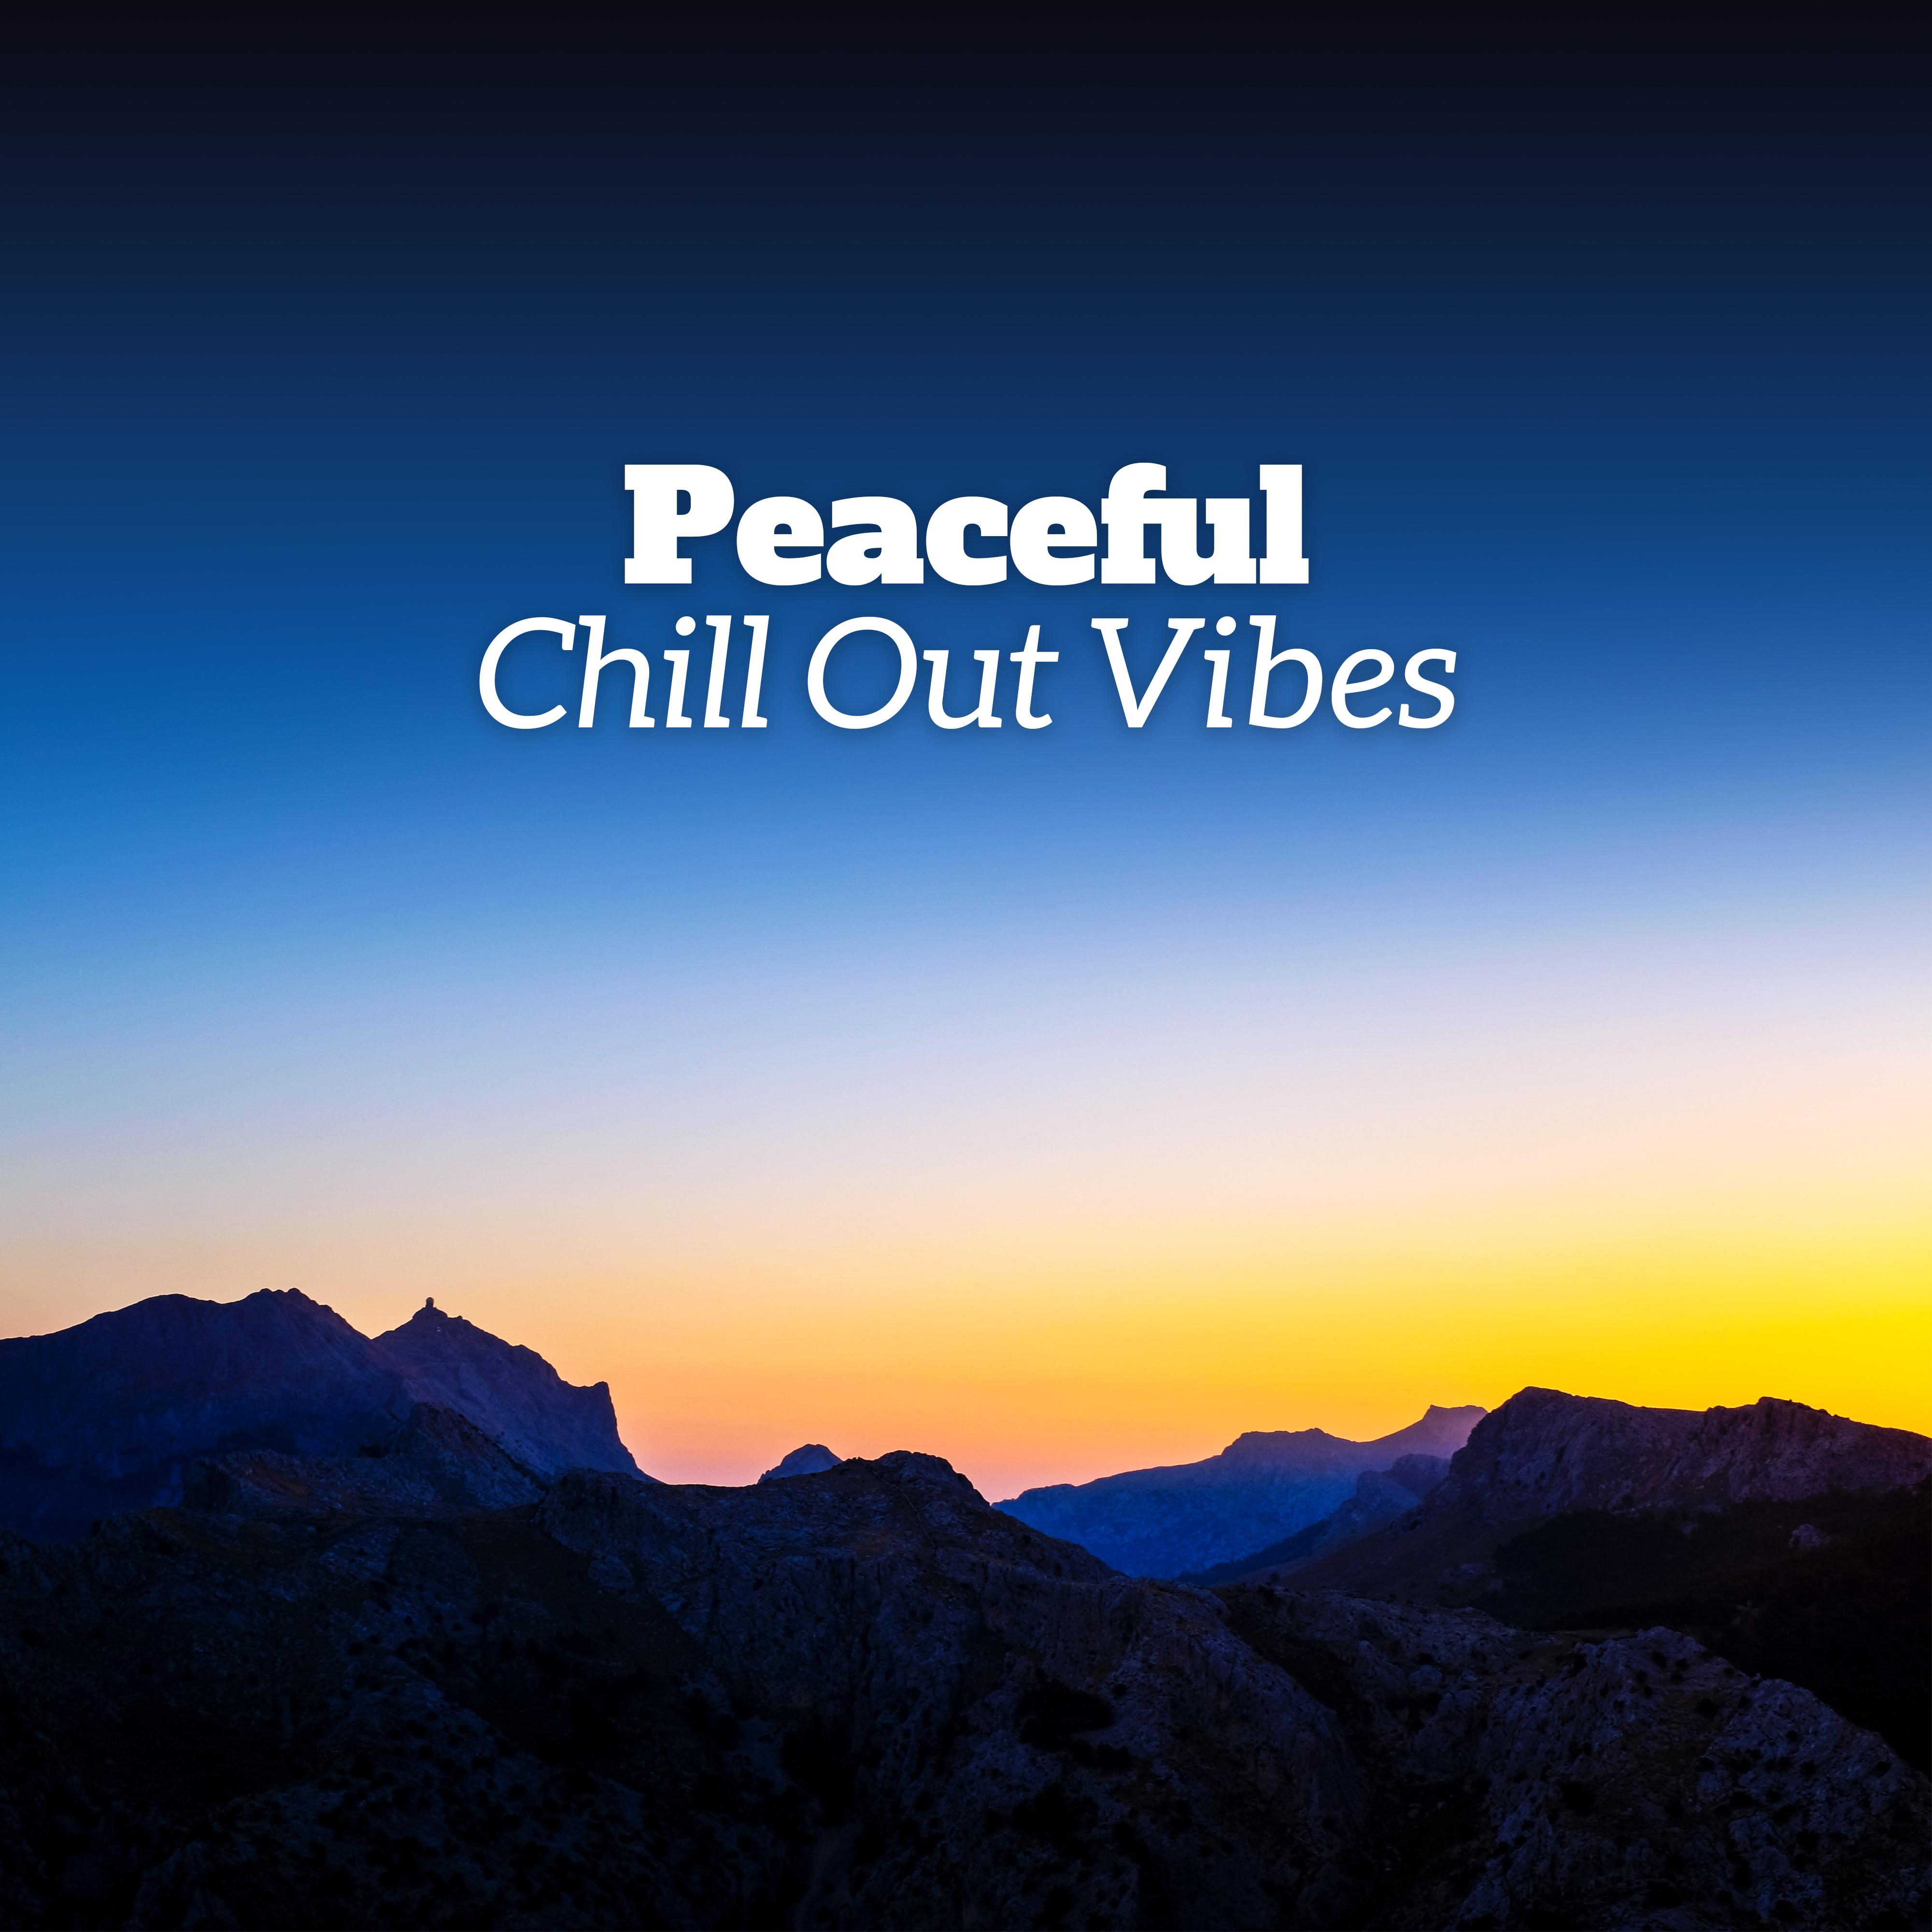 Peaceful Chill Out Vibes